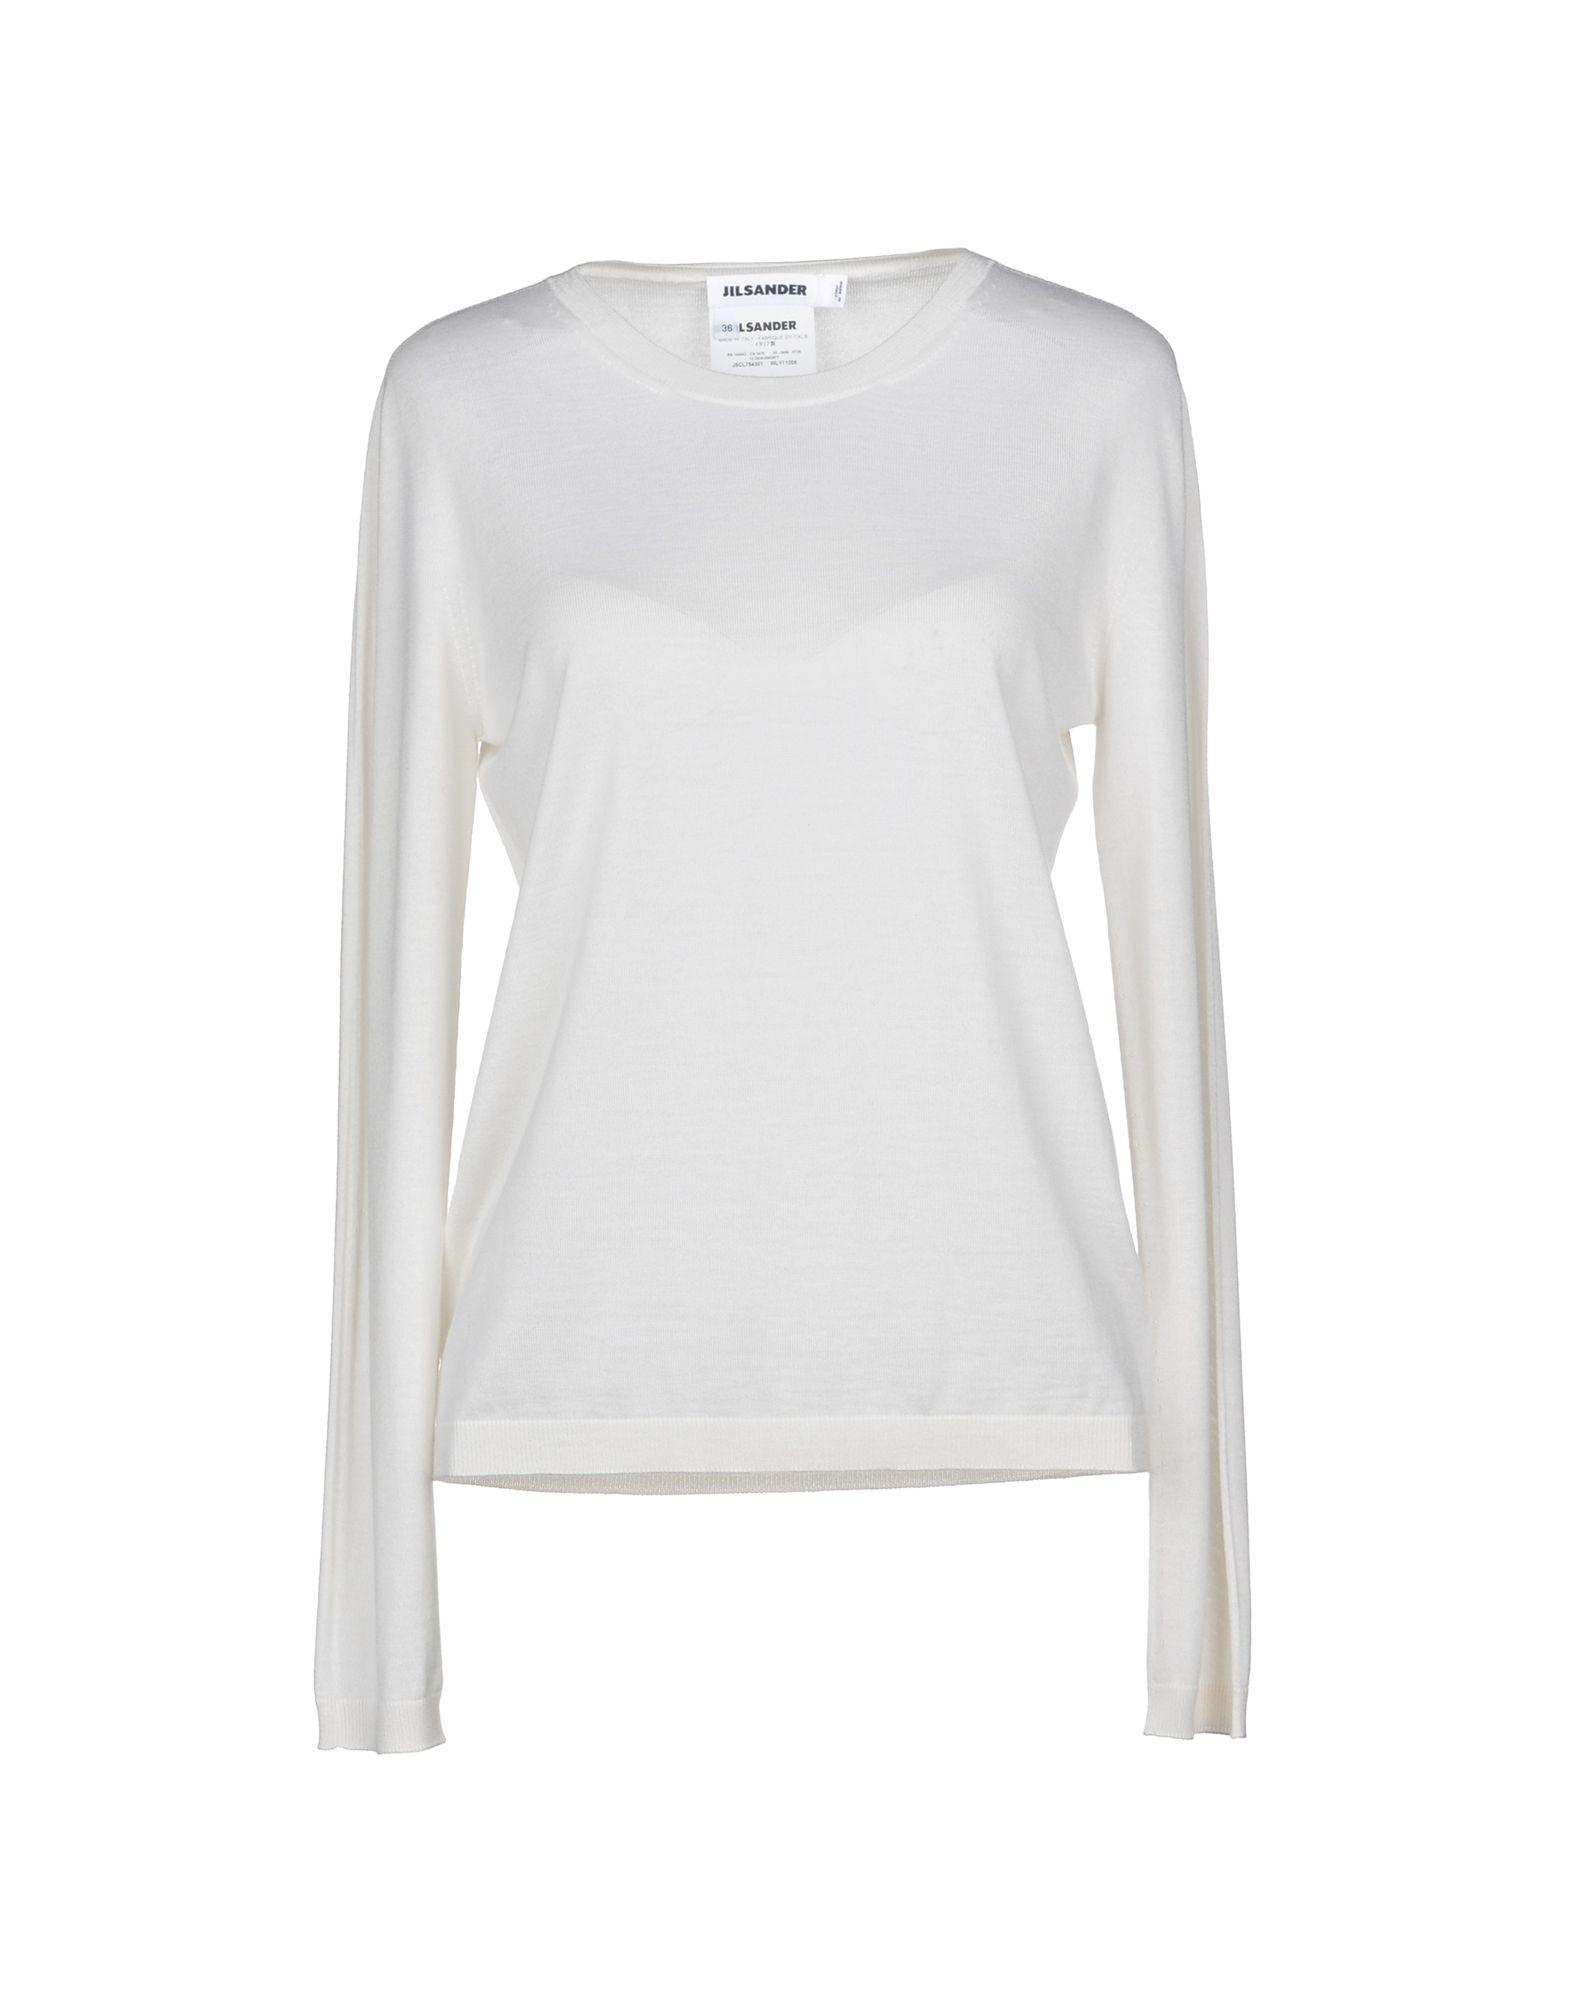 Jil Sander Cashmere Sweater in Ivory (White) - Lyst